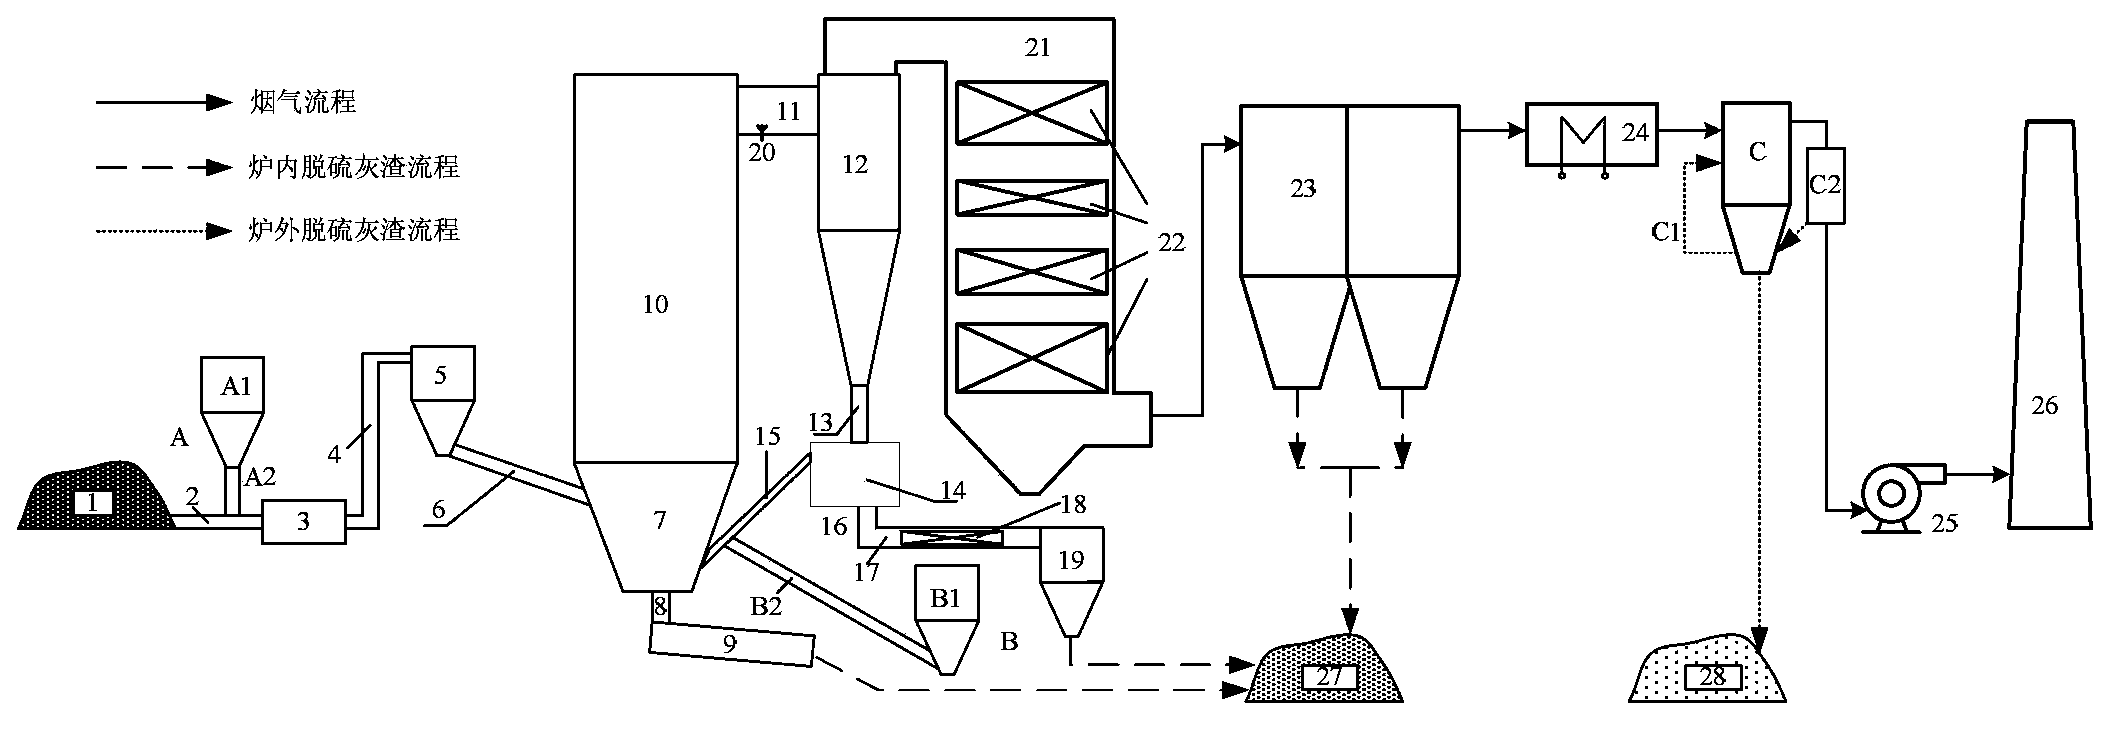 Ultra-low emission circulating fluidized bed boiler with three stages of desulfurization systems